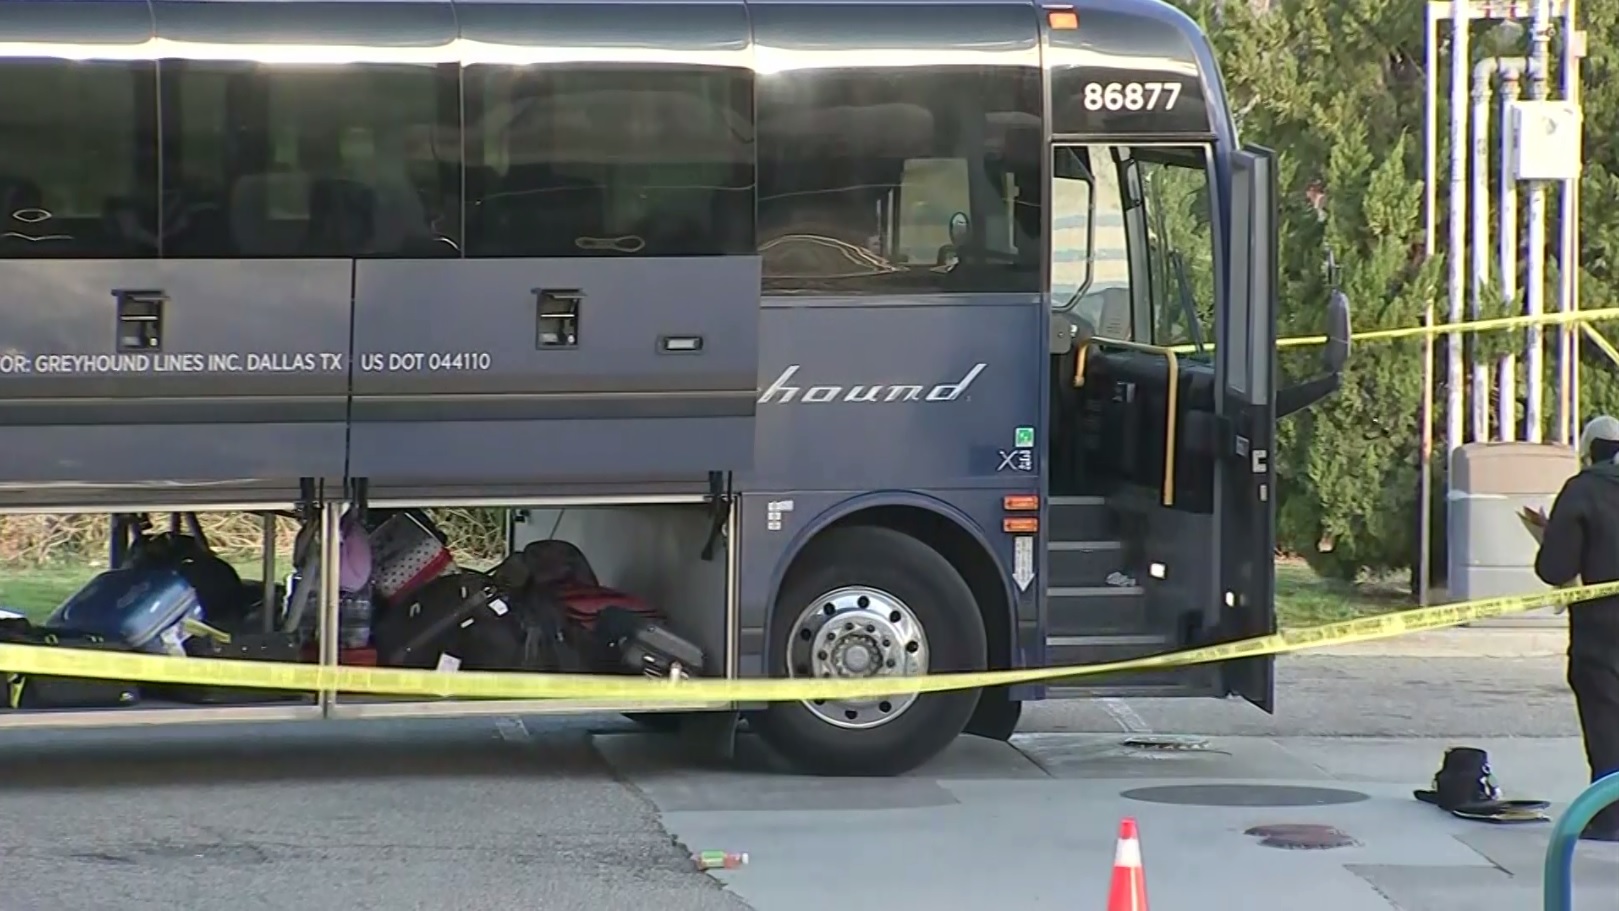 Police on the scene following a shooting on a Greyhound bus in Lebec on February 3, 2020. (CBS)